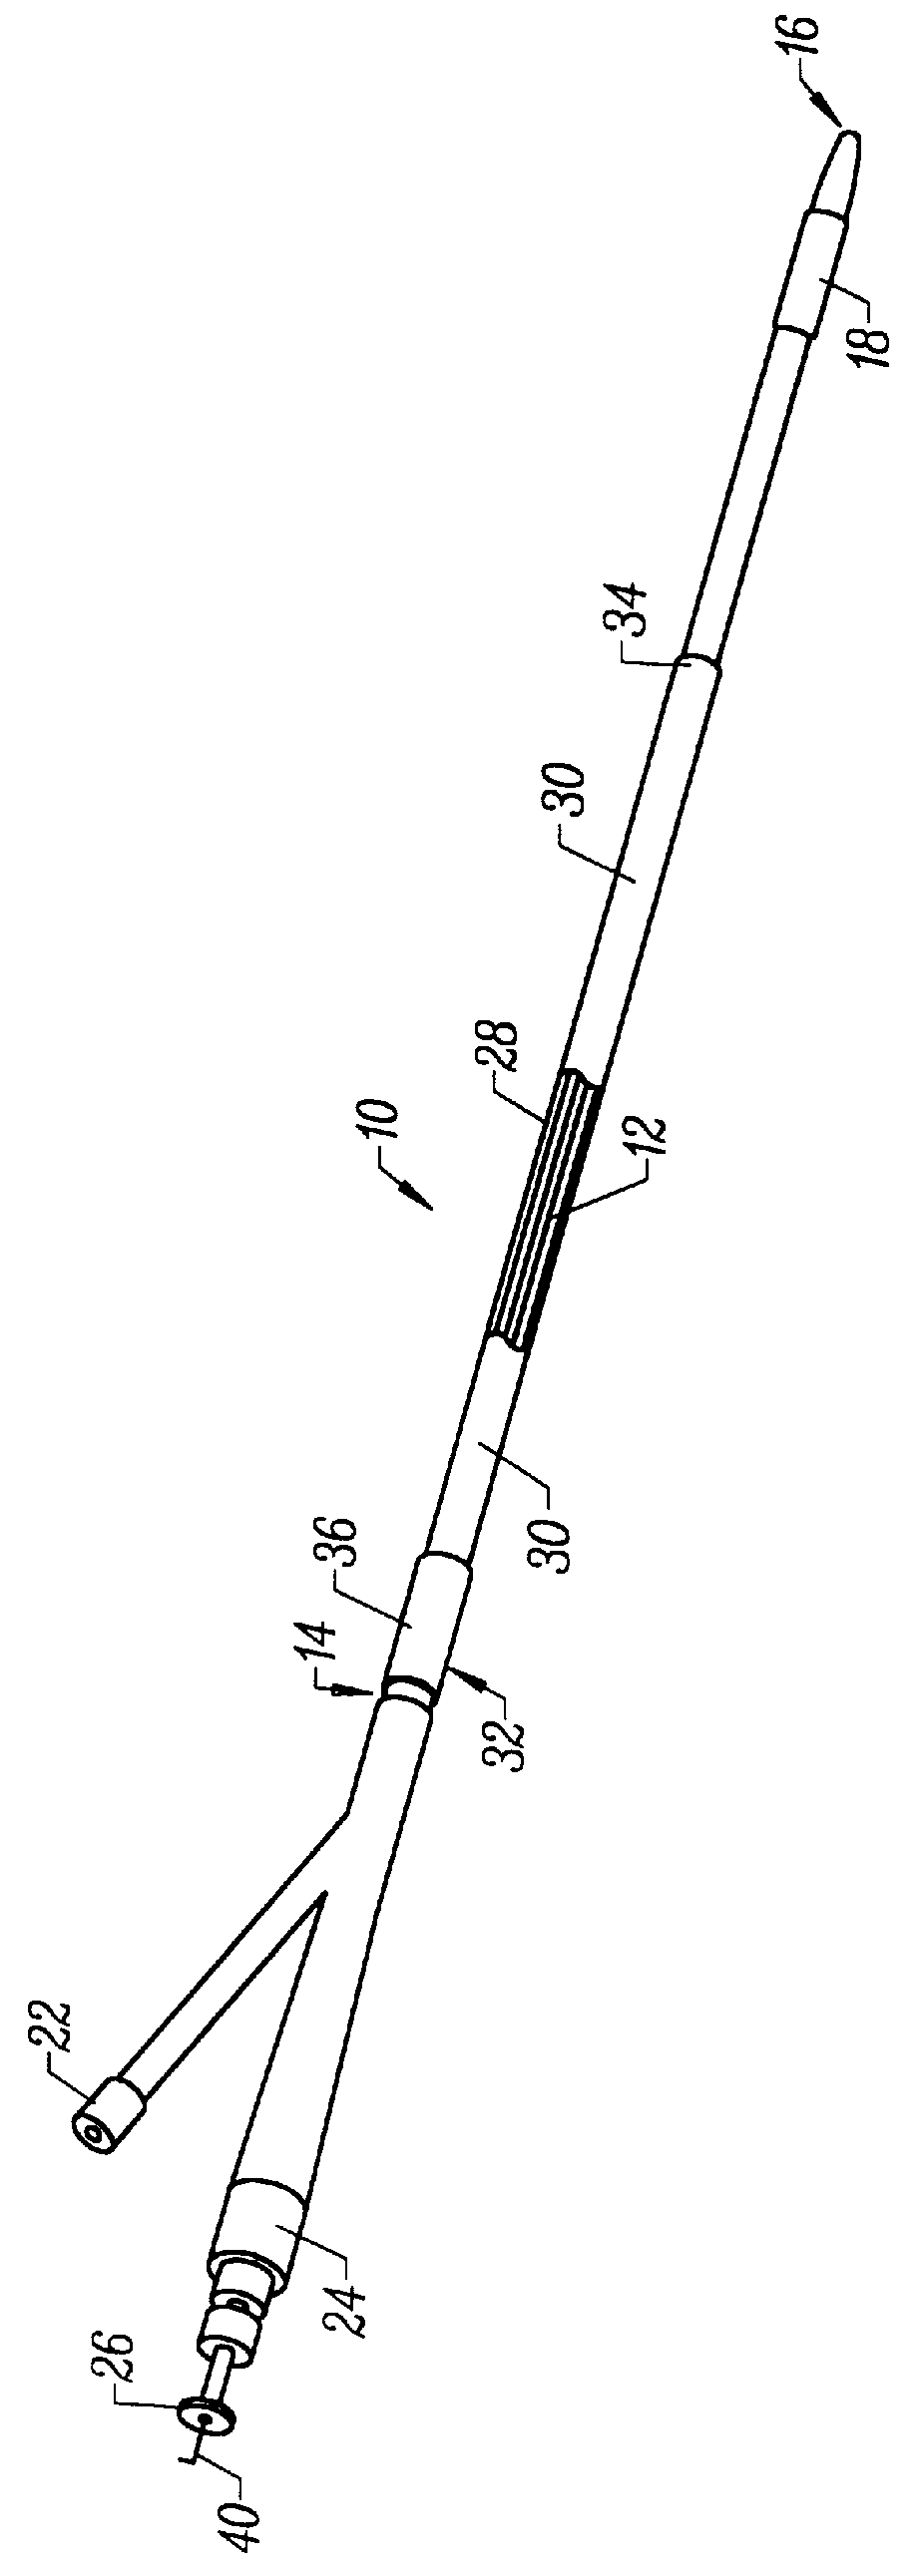 Method and apparatus for performing hysterosalpingography